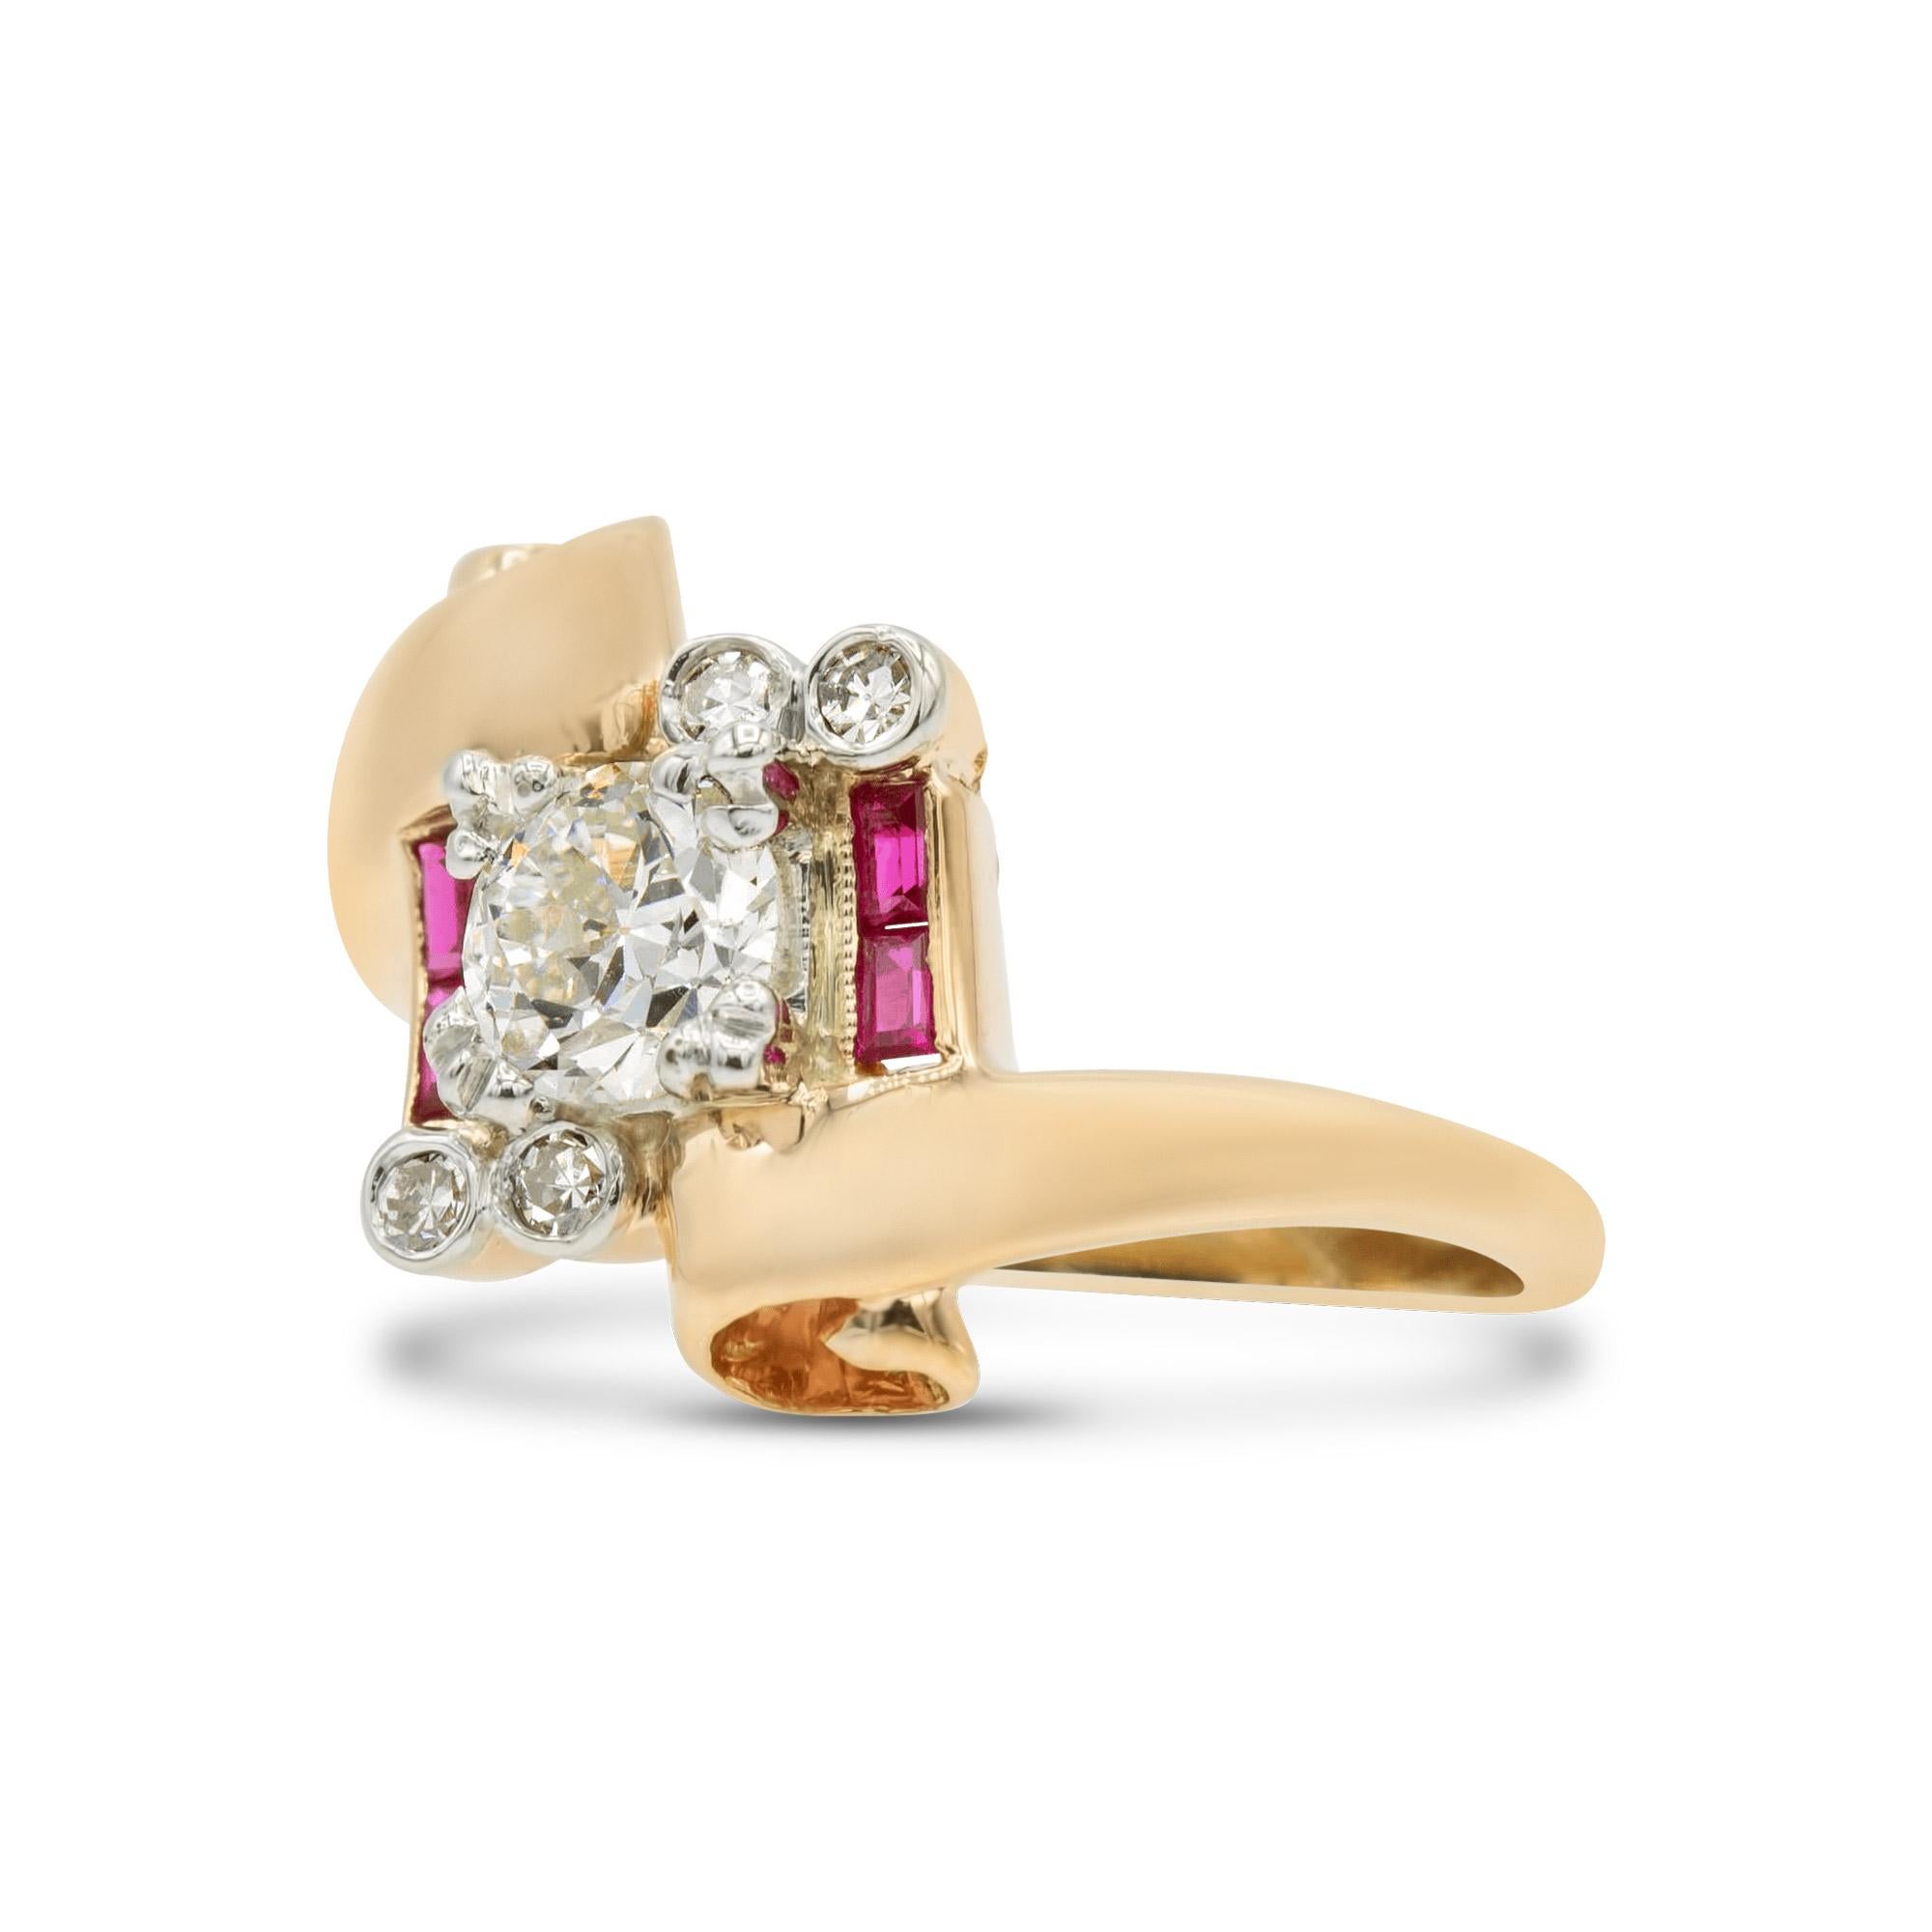 This shining rose gold setting is the home to a 0.53 ct. old Euro with a small table and chunky facet patterns, it has the true qualities of an antique stone. Its accenting rubies and single-cut diamonds add so much charm and the scroll detail on